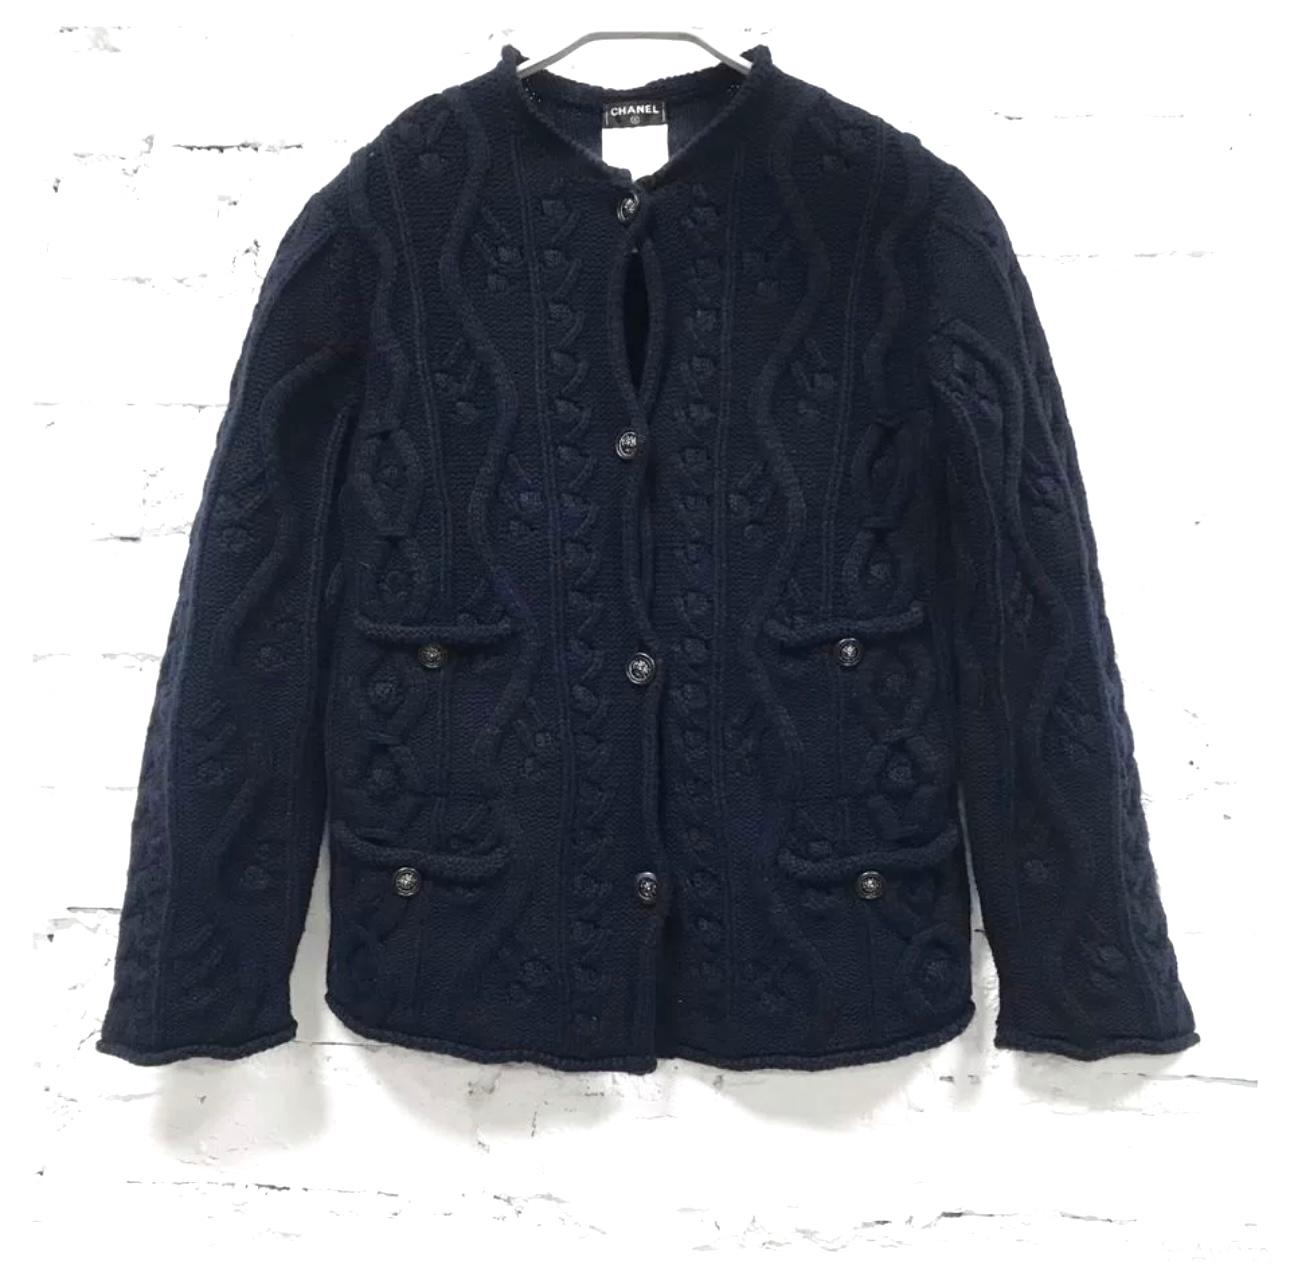 Chanel navy cashmere jacket with CC lionhead buttons -- from Runway of Paris / EDINBURGH Collection by Karl Lagerfeld, 2013 Metiers d'Art
As seen on many celebs!
Size mark 36 FR. Never worn.